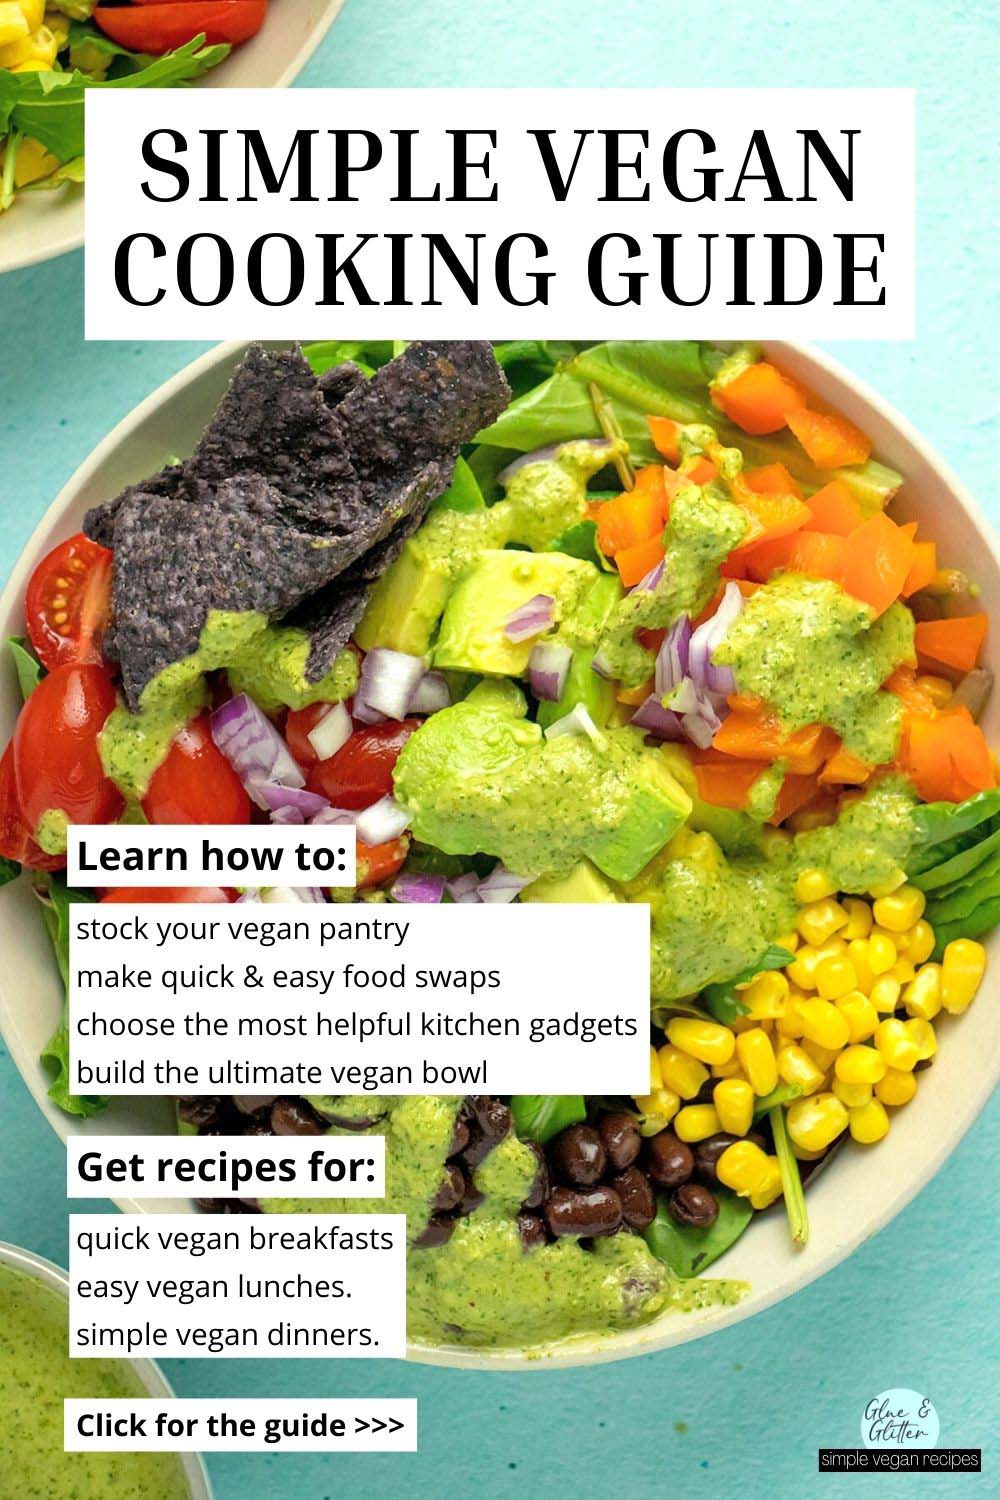 photo of a salad with a text overlay that says, "Simple Vegan Cooking Guide" and lists the table of contents